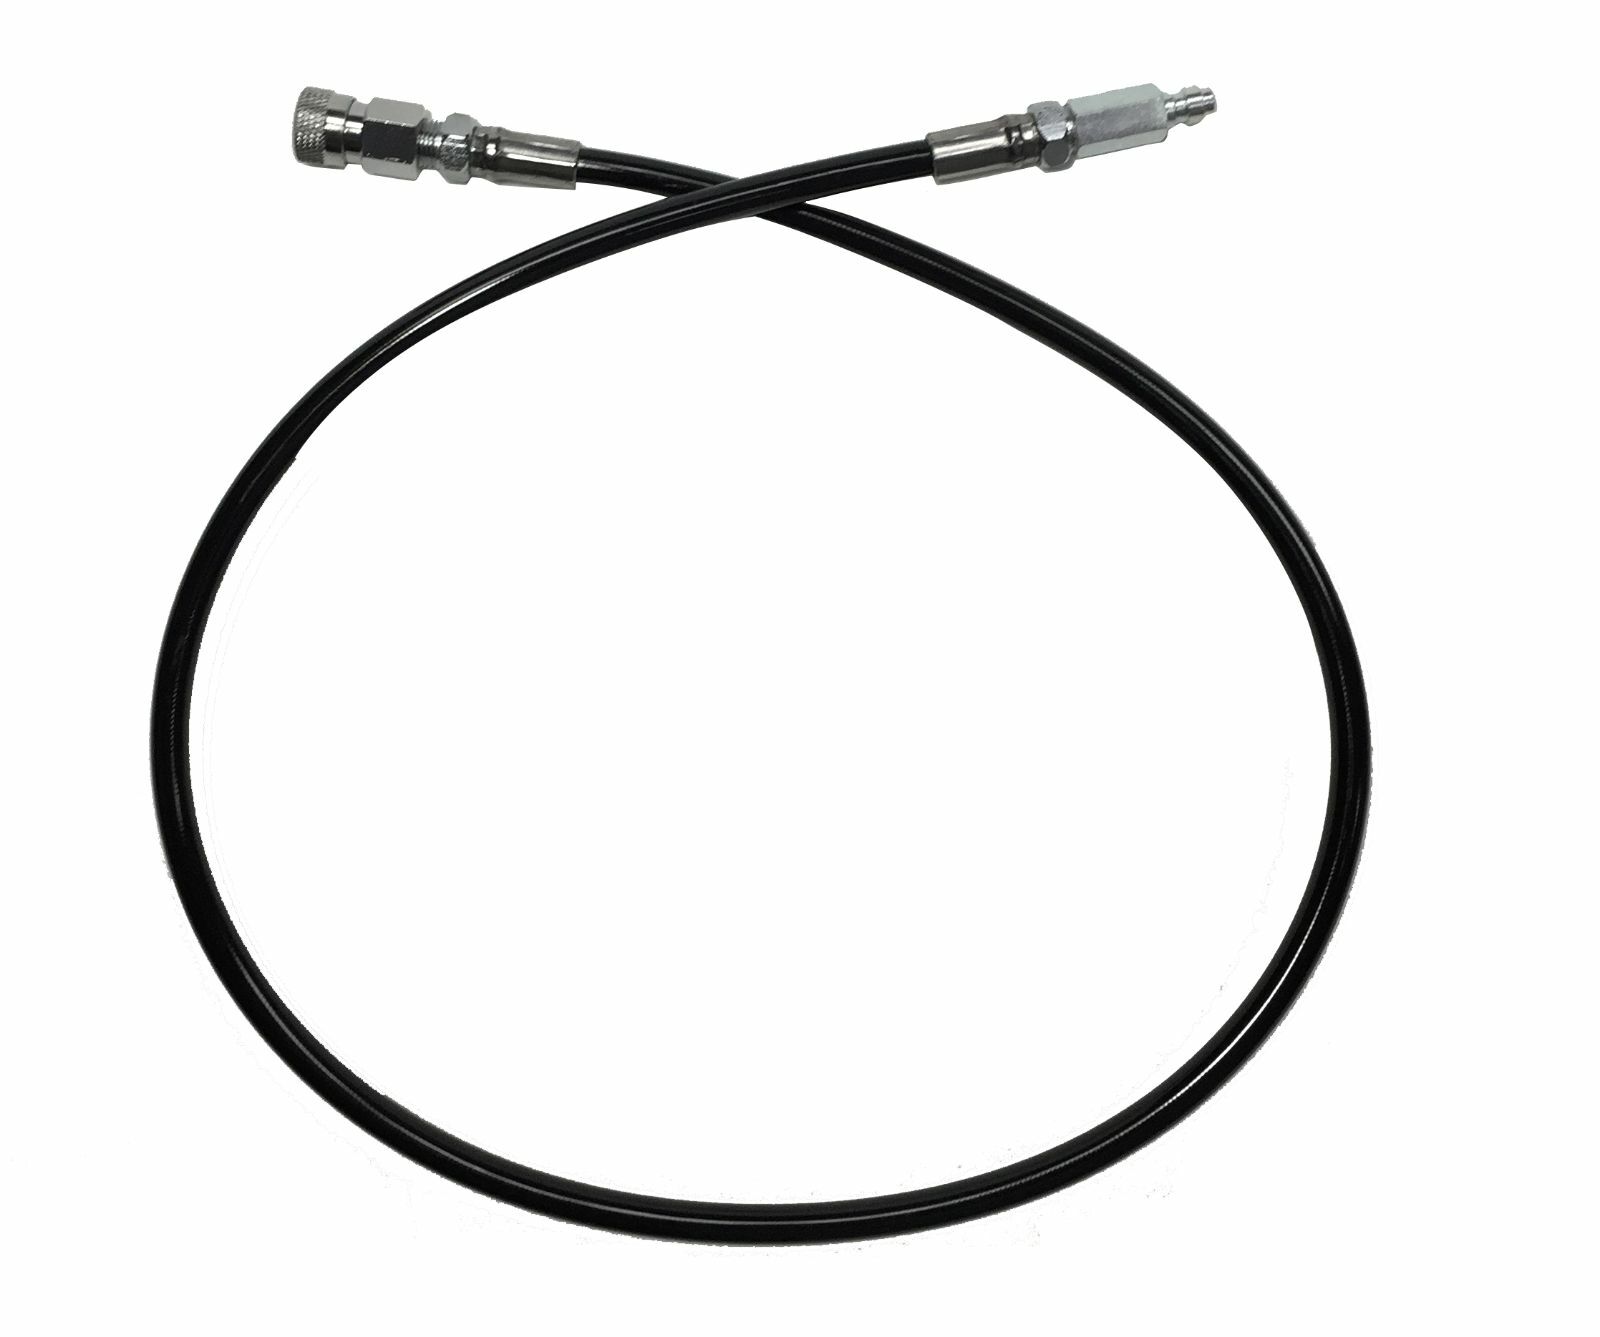 G7 Paint Tank Fill Whip 4500psi Line 34" Scuba Fill Pcp 1/8" Quick Release 10510